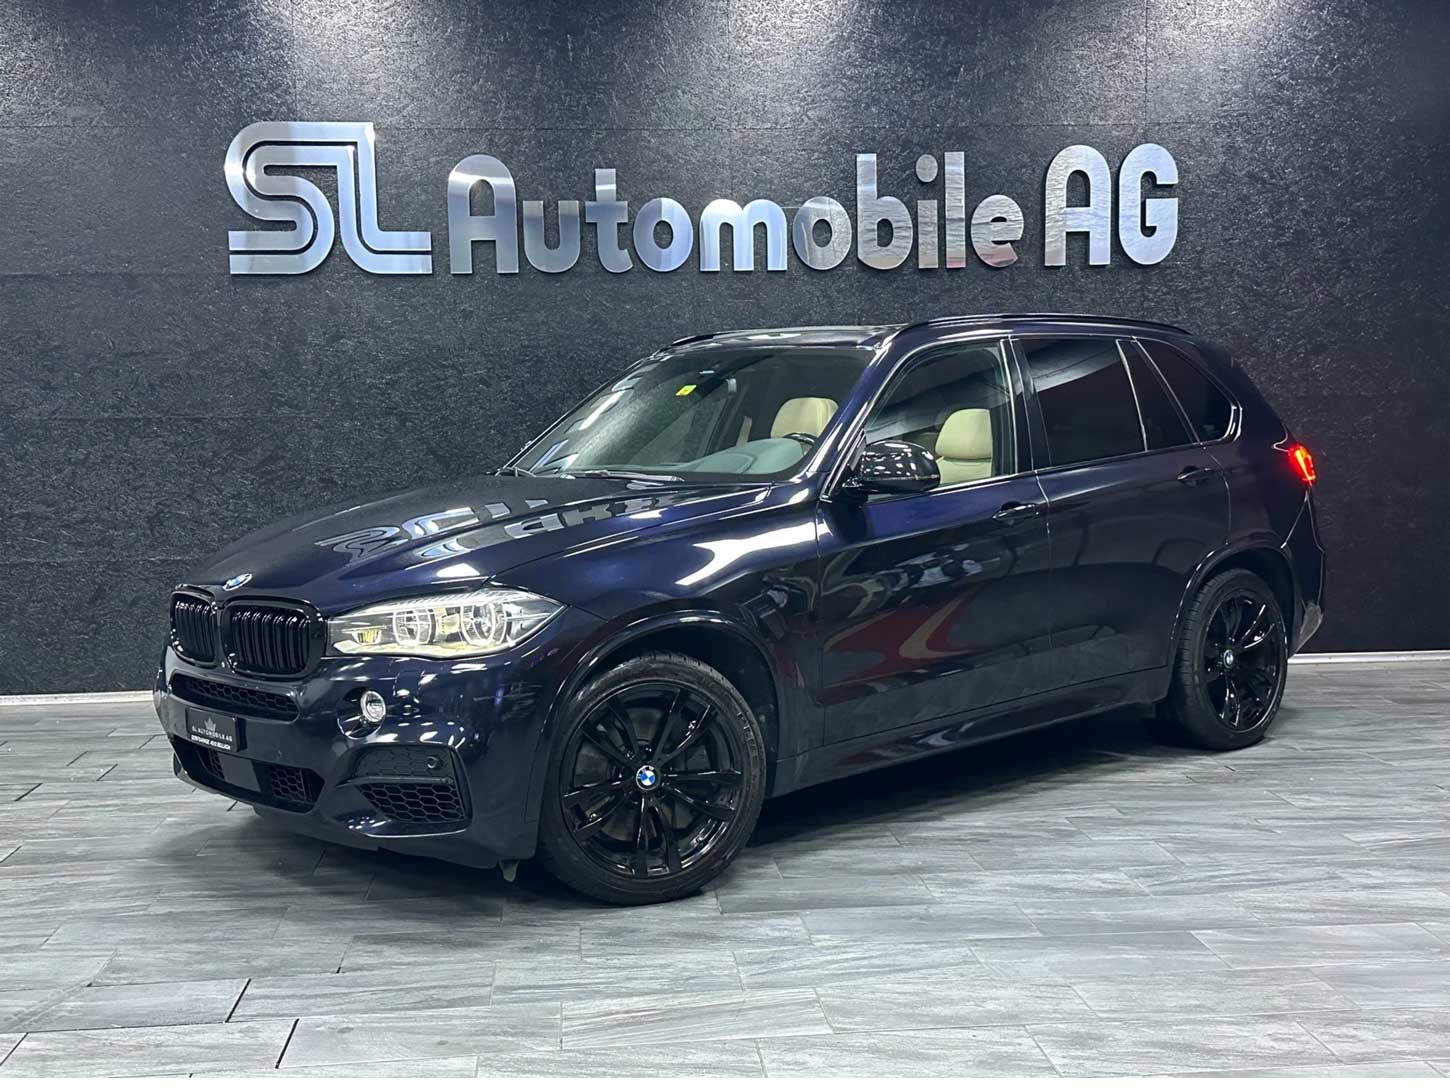 <a href="https://www.autoscout24.ch/de/d/bmw-x5-xdrive-m50d-steptronic-11037775" style="color: white; text-decoration: none;" onmouseover="this.style.color='yellow'" onmouseout="this.style.color='white'">BMW X5 xDrive M50d Steptronic</a>